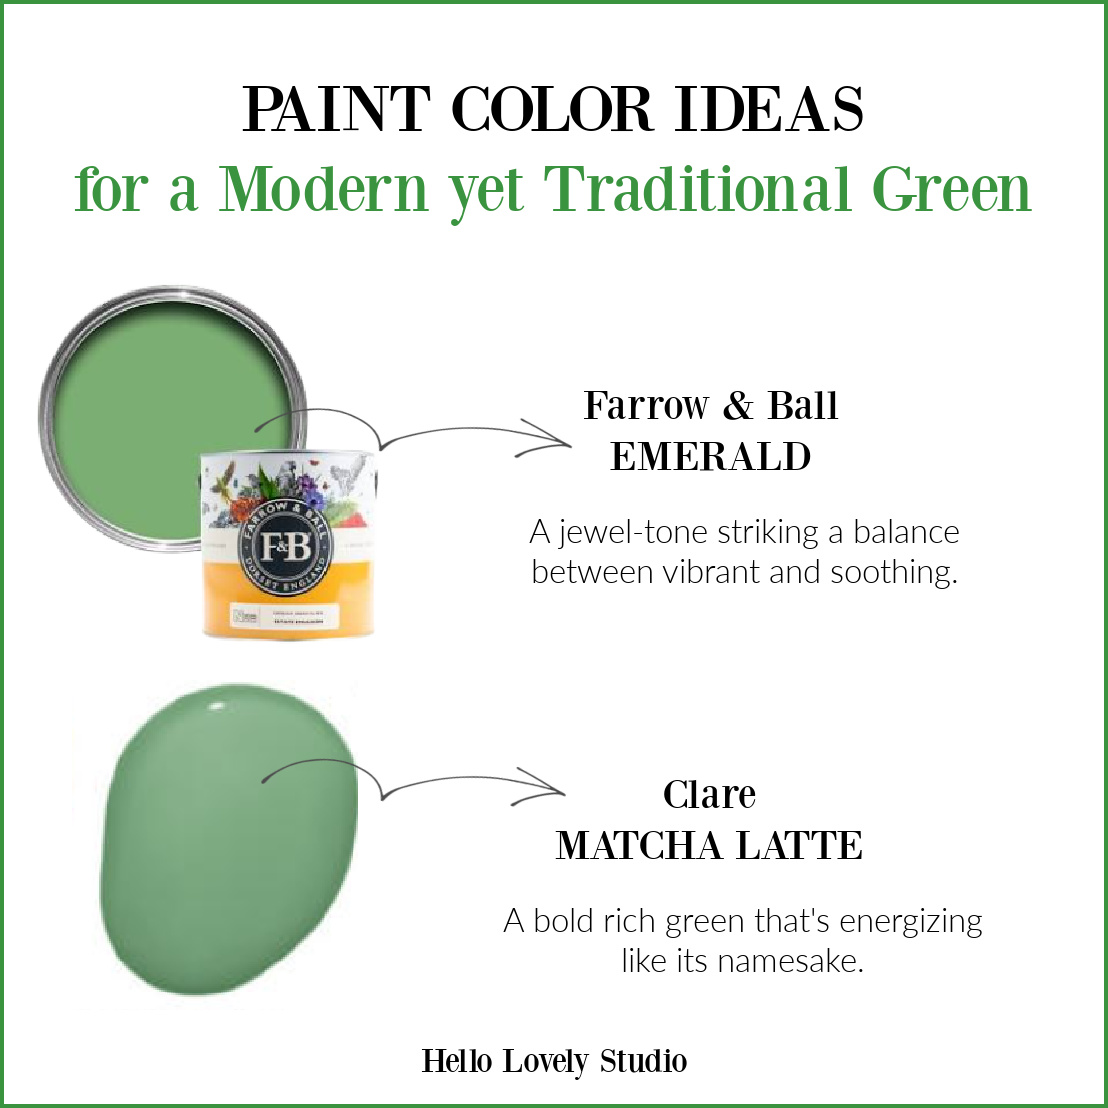 Paint Color Ideas for a Modern Yet Traditional Green: Emerald and Matcha Latte - Hello Lovely Studio. #greenpaintcolors